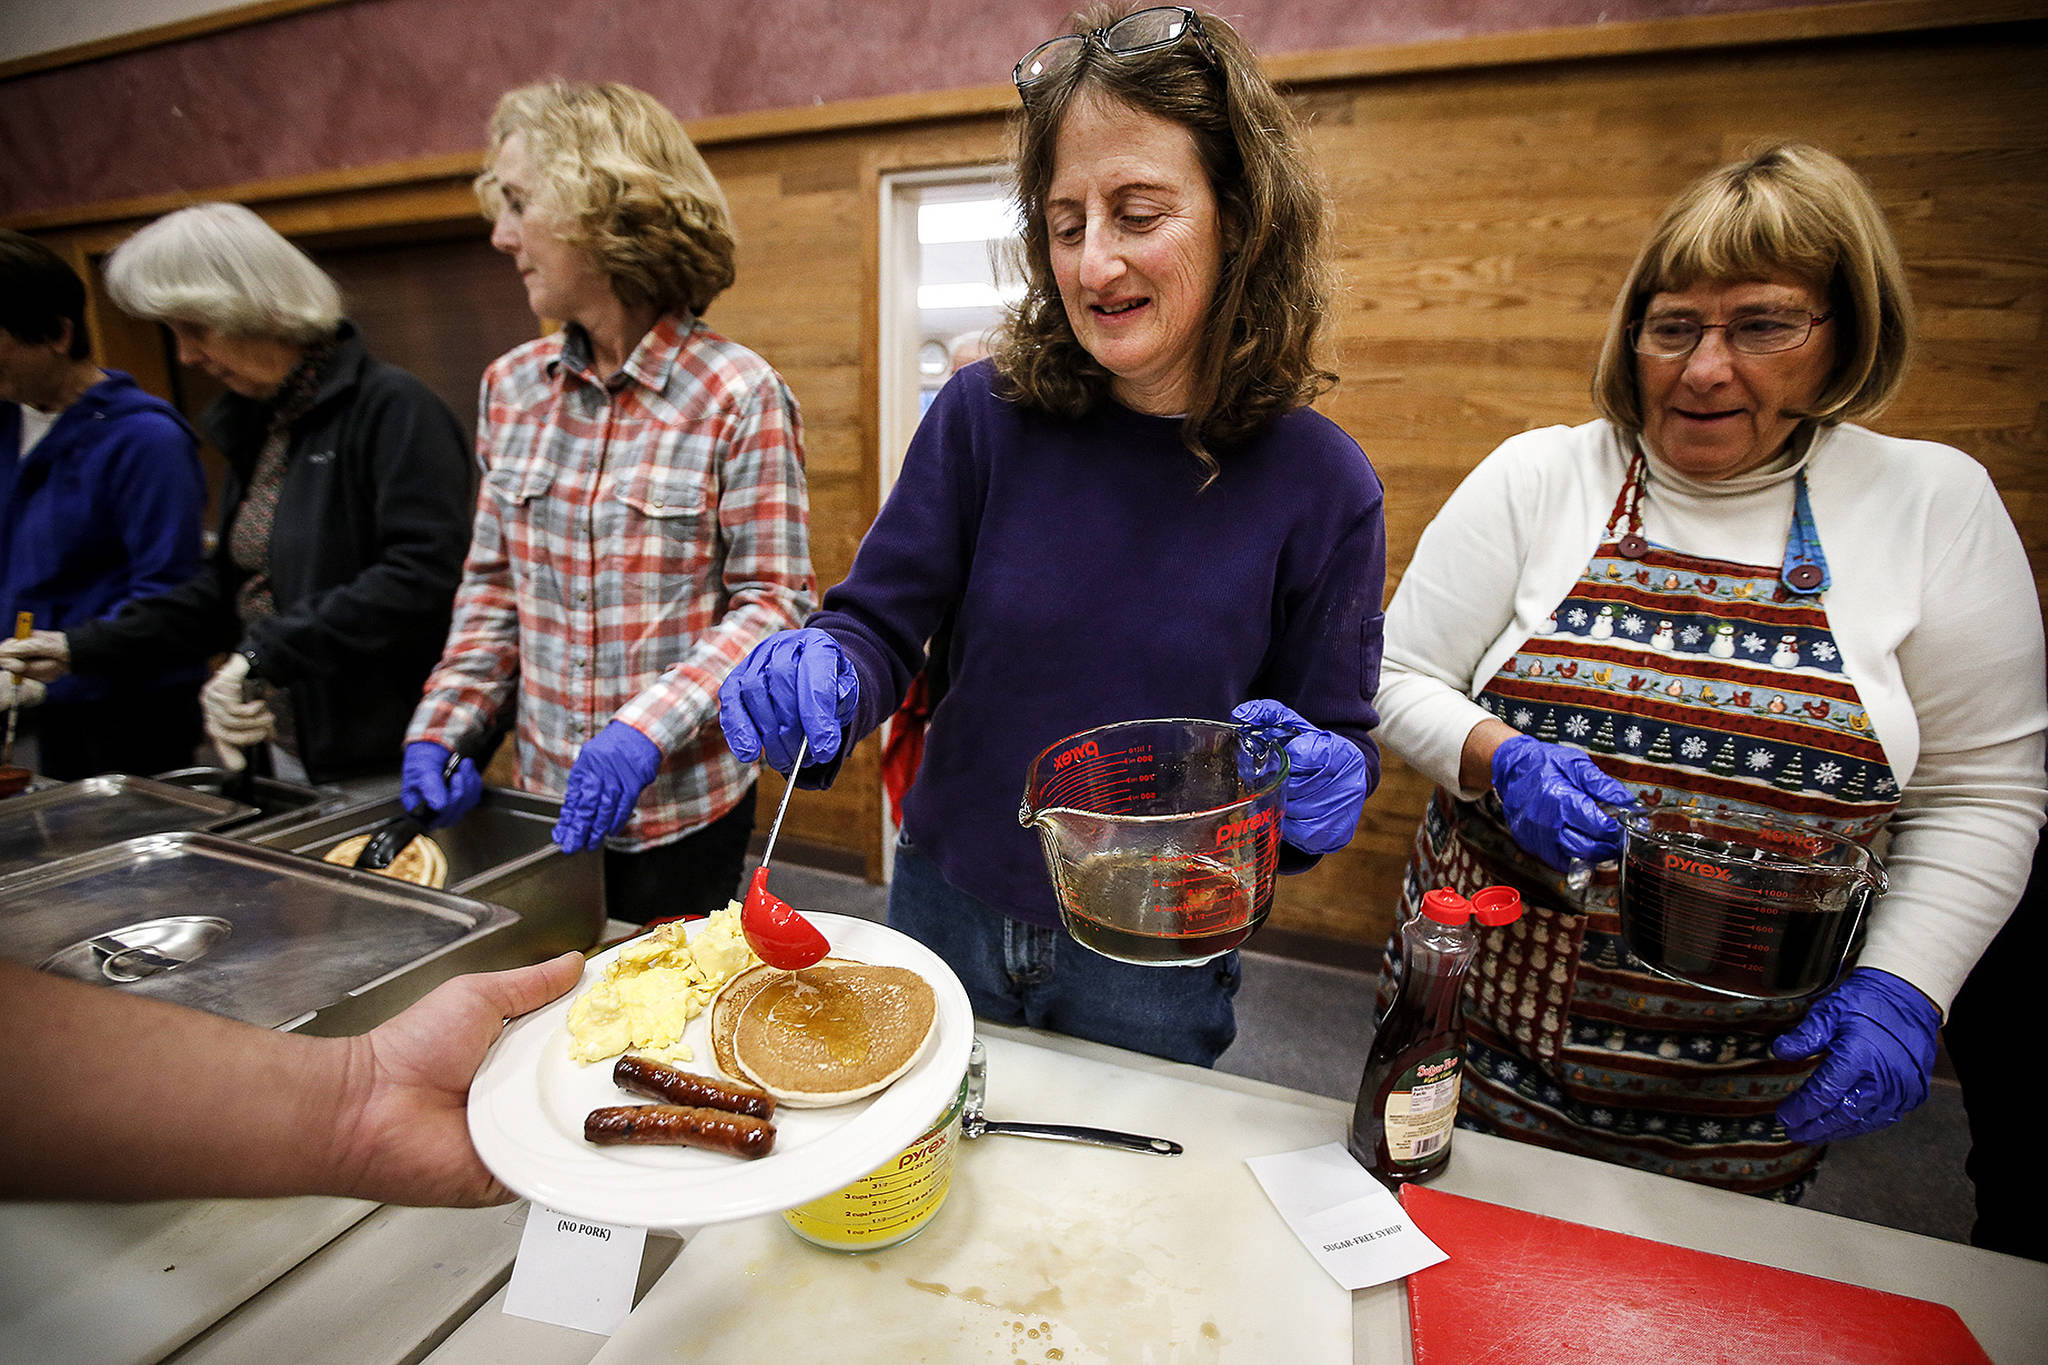 Barb Chessler (center) helps serve up breakfast along with other volunteers from Edmonds Unitarian Universalist Congregation at the Neighbors in Need breakfast at Trinity Lutheran in Lynnwood on Jan. 27. (Ian Terry / The Herald)